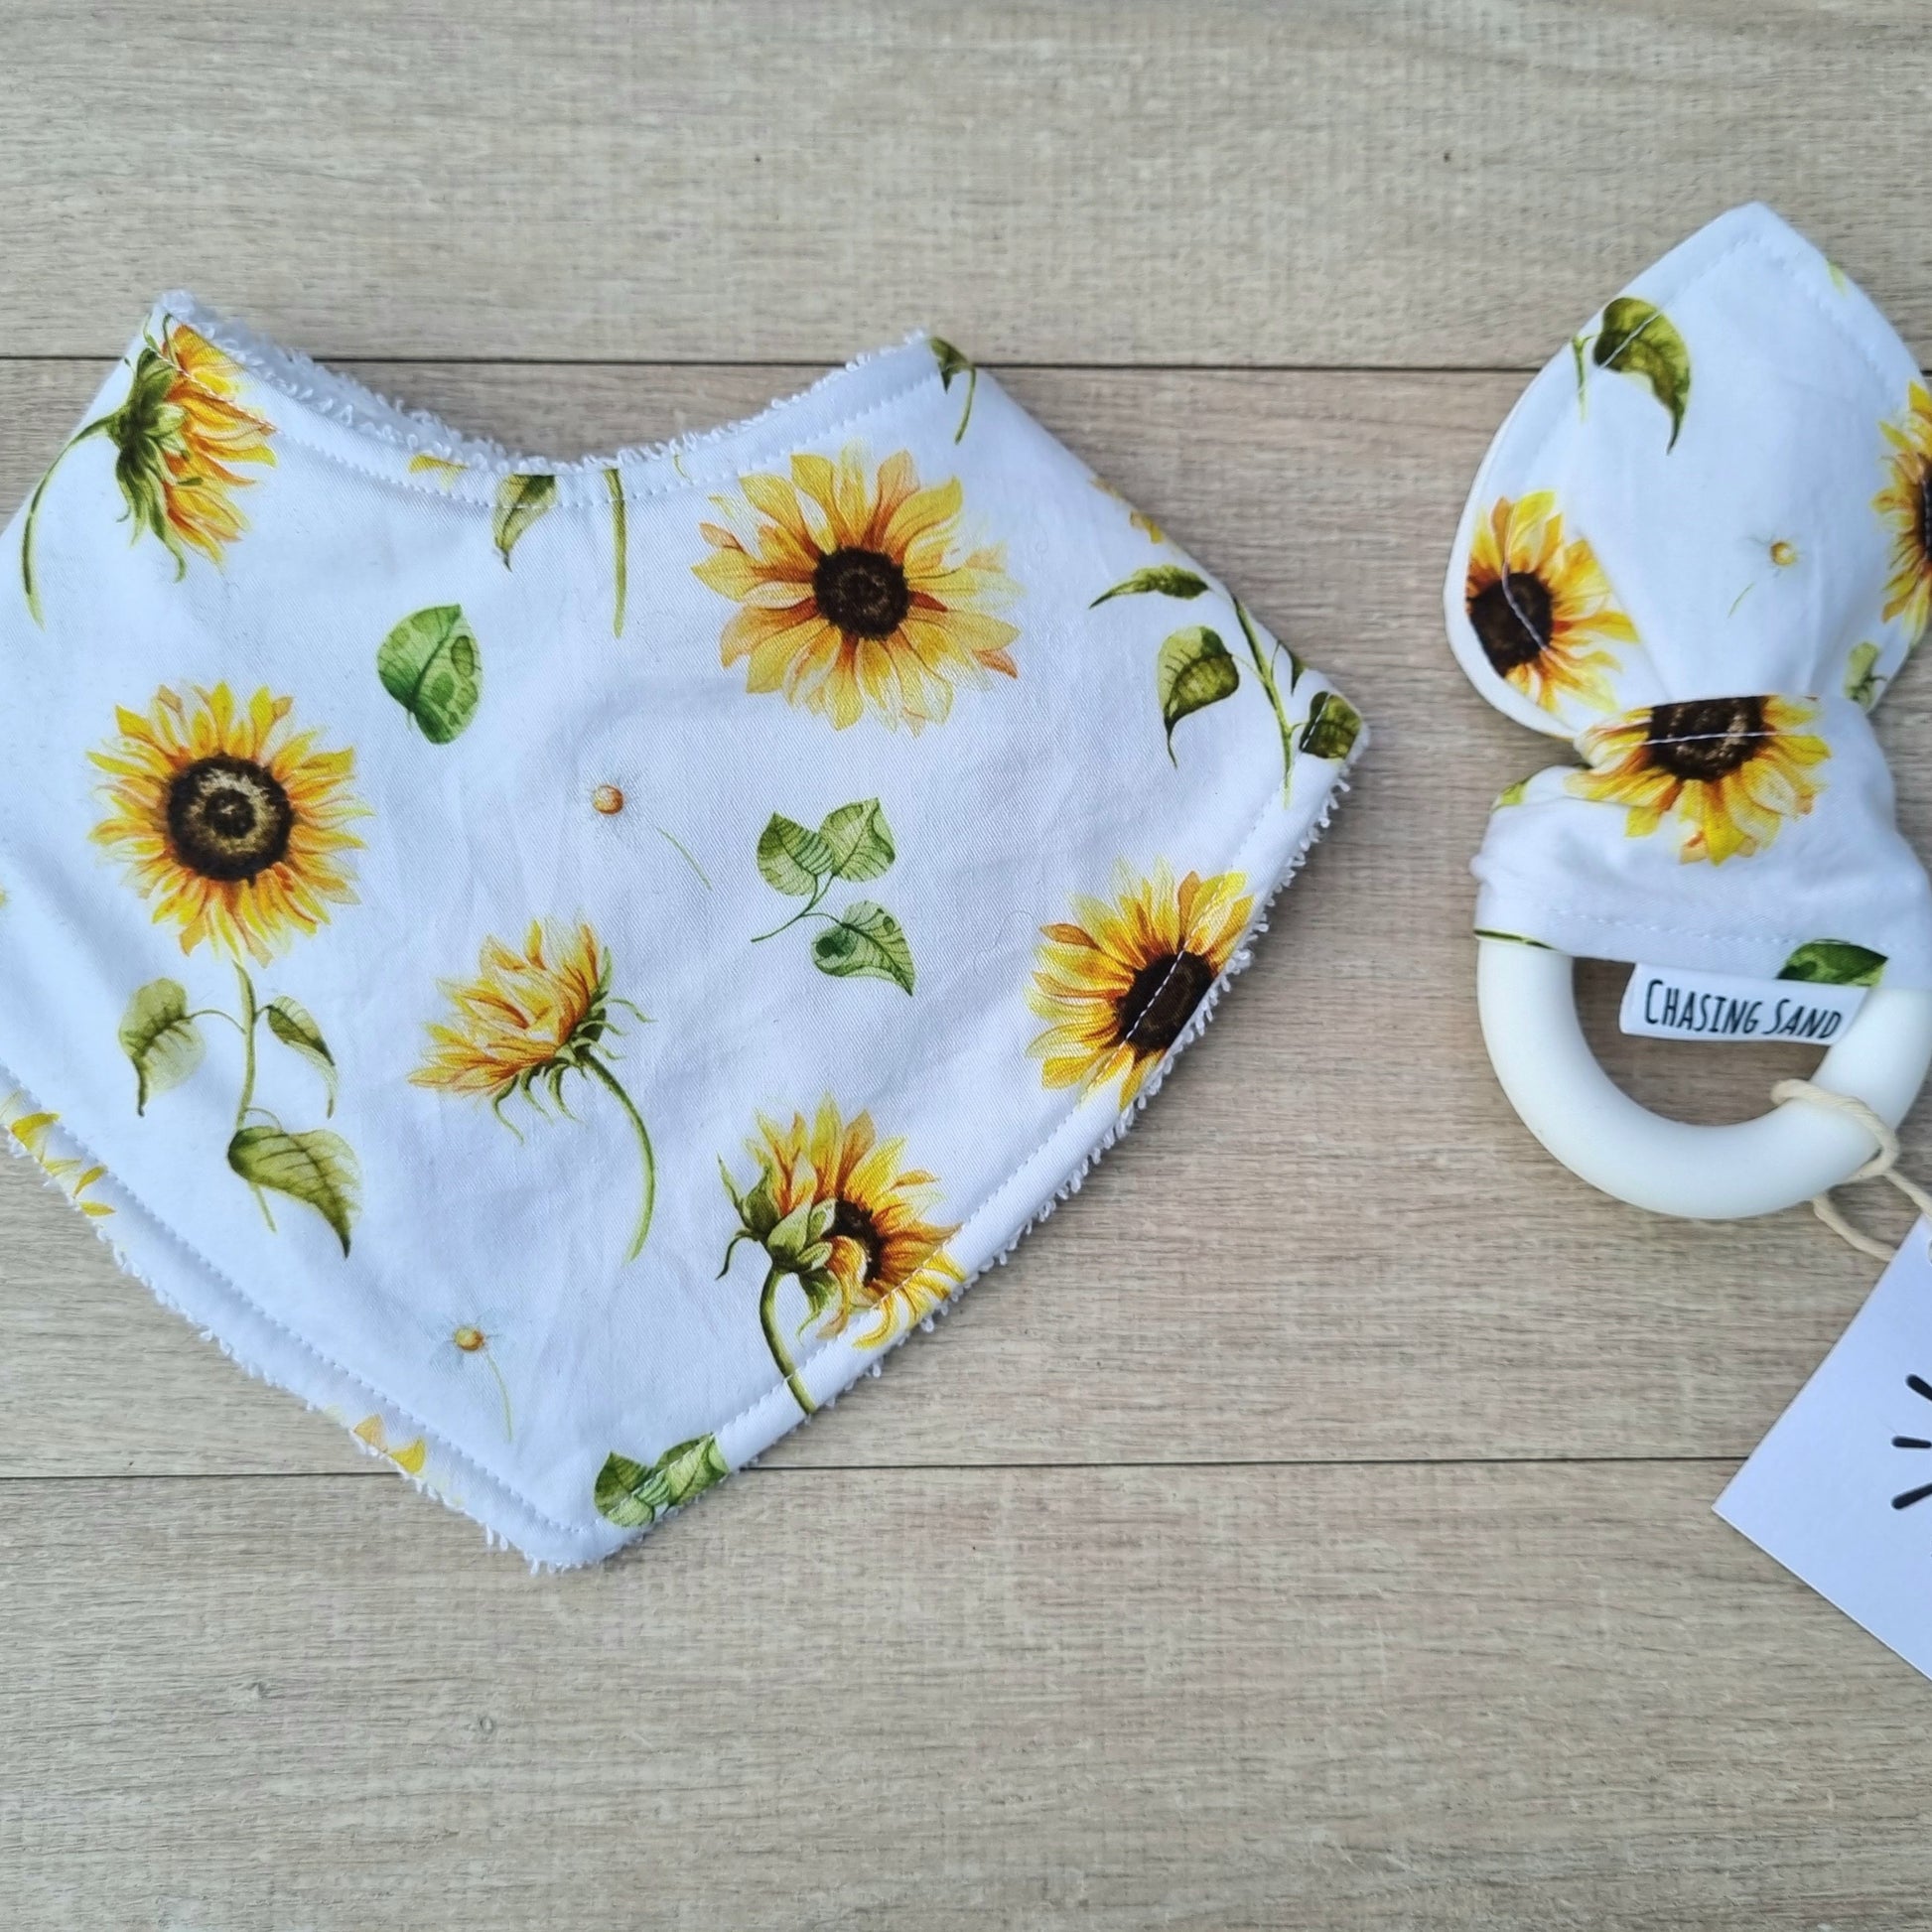 2 Piece Gift Set - Sunflowers against wooden backdrop. Yellow sunflowers on white background. Each set contains 1x Dribble Bib and 1x Teether.